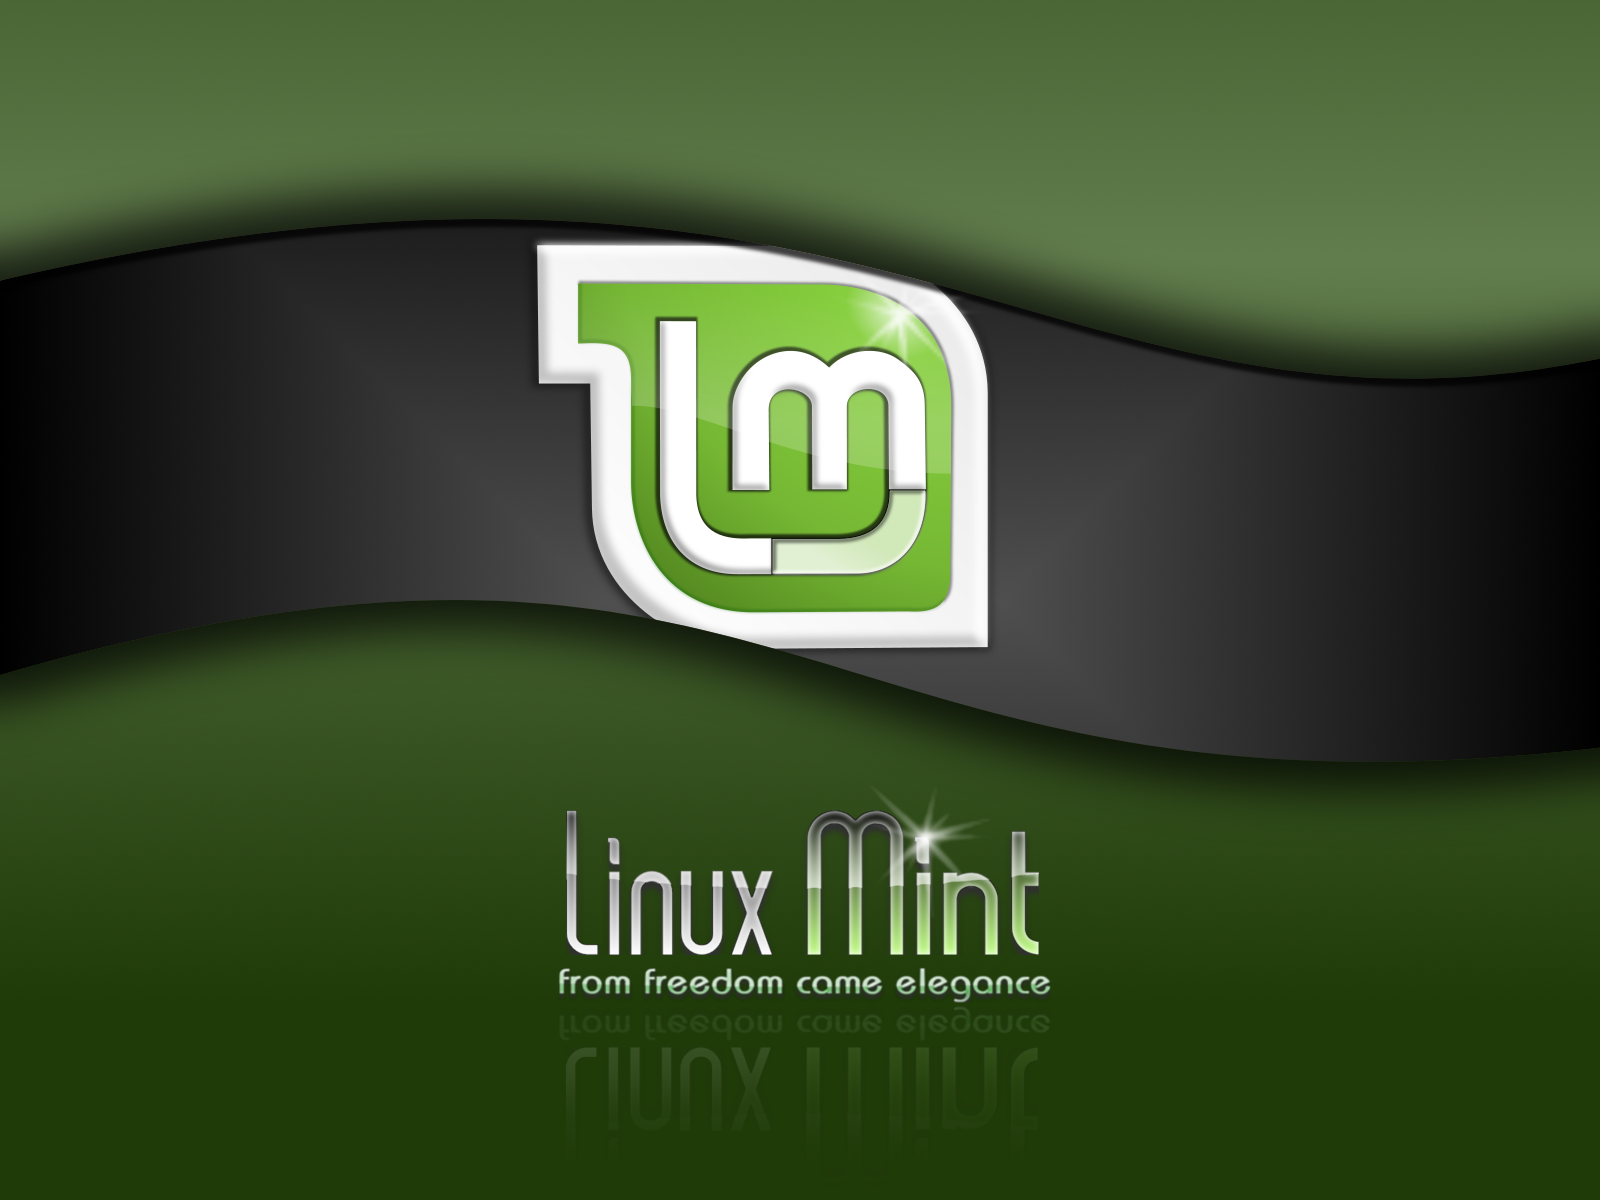 Full Re Of Linux On Wallpaper Posted Here I Changed